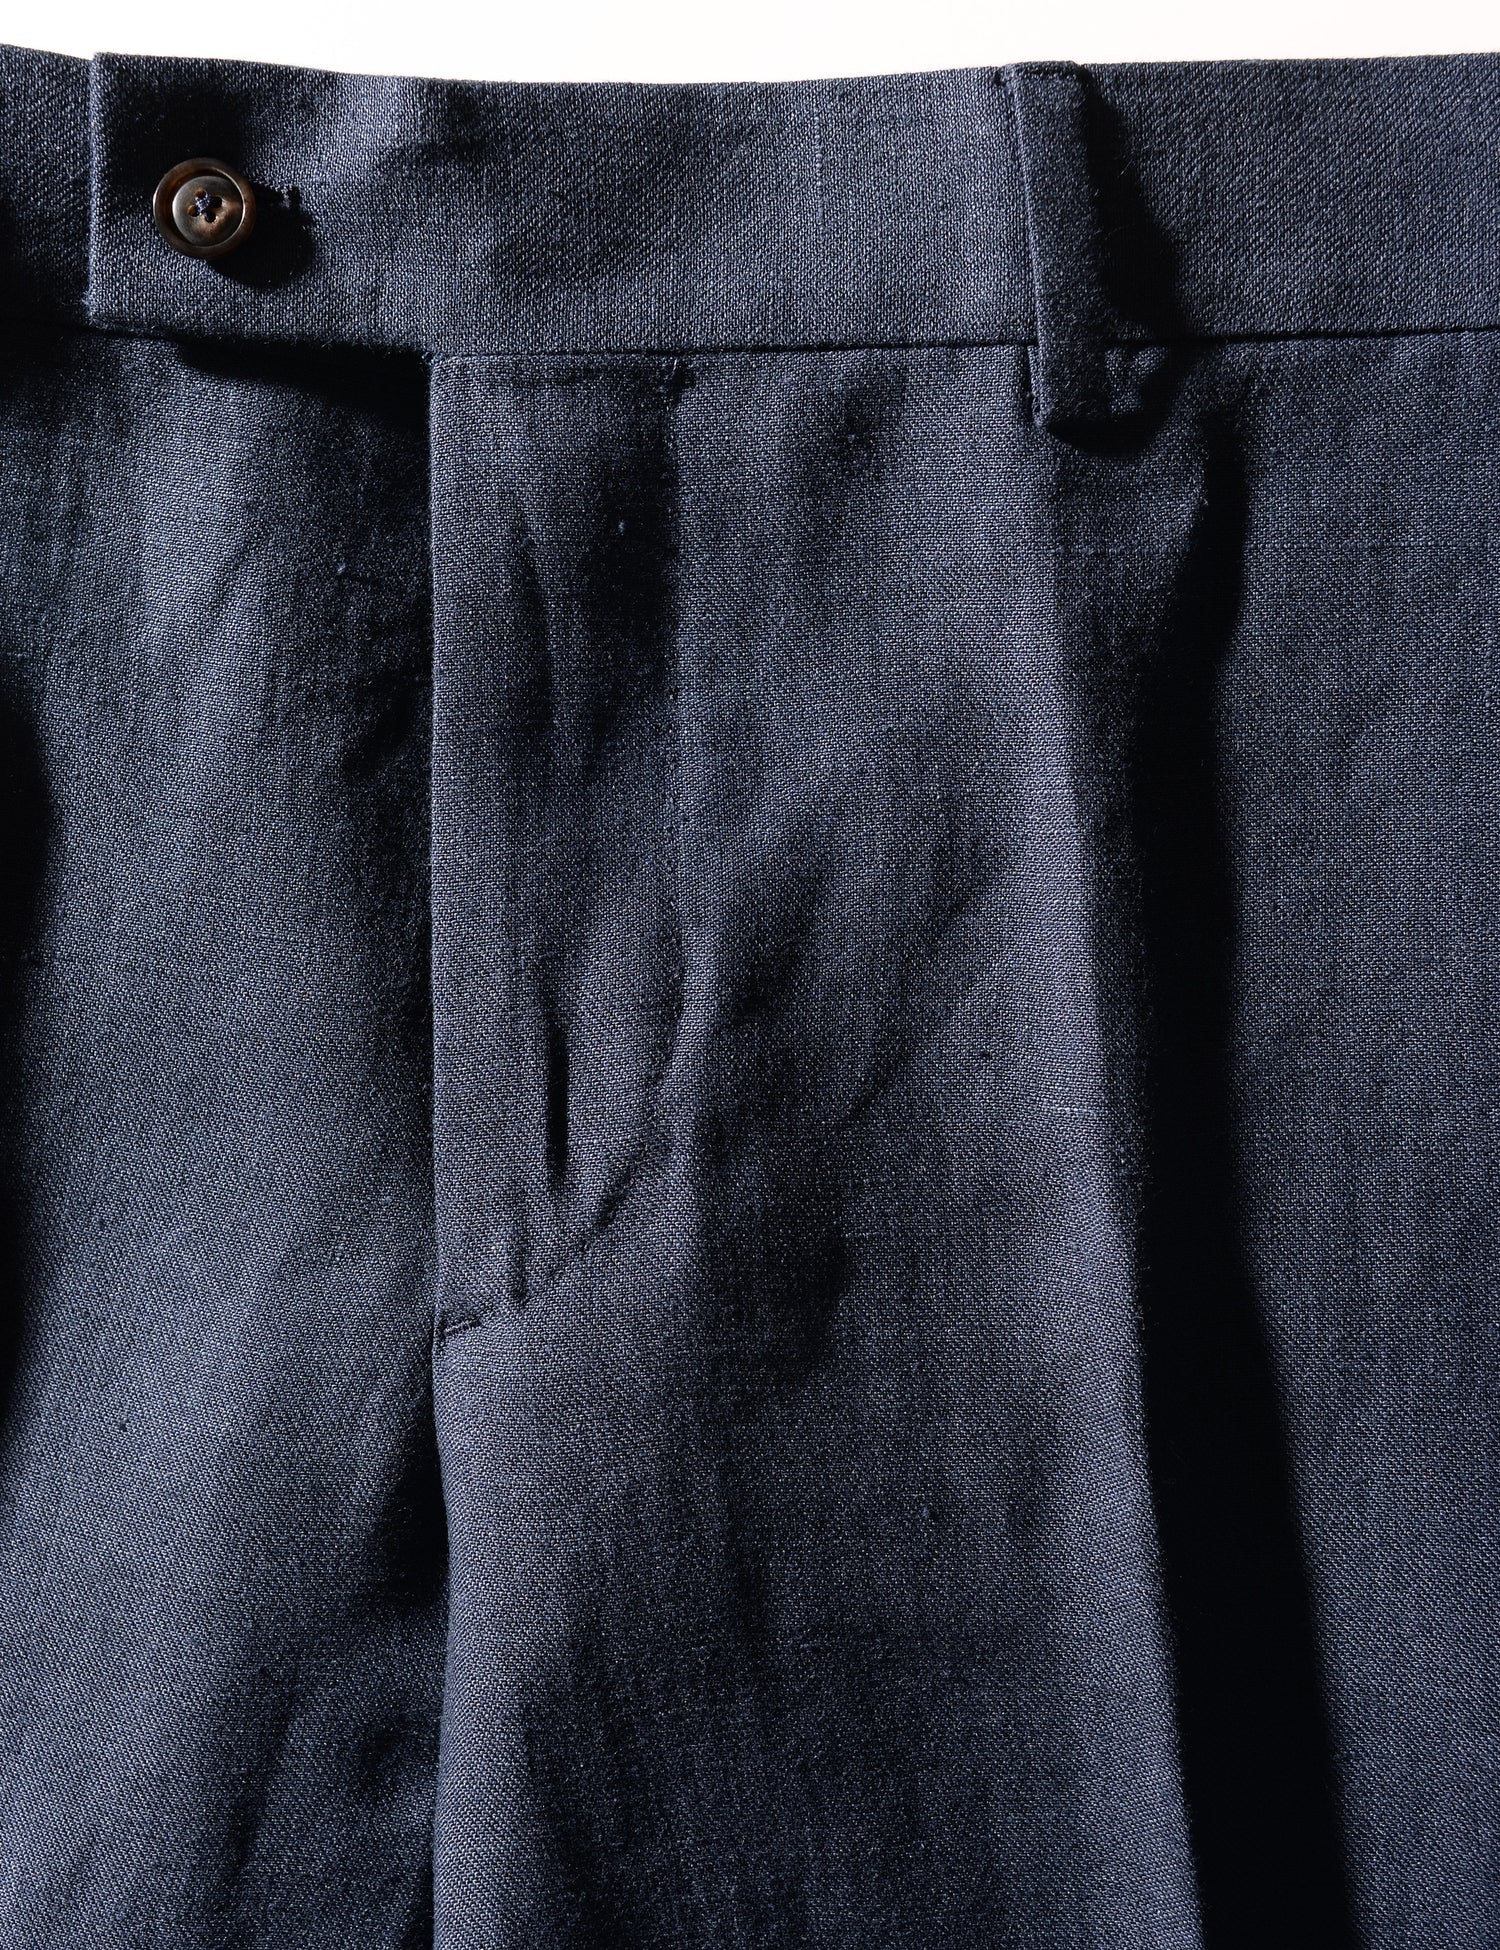 Detail shot of Brooklyn Tailors BKT50 Tailored Trousers in Linen Twill - Salerno Blue showing front button closure